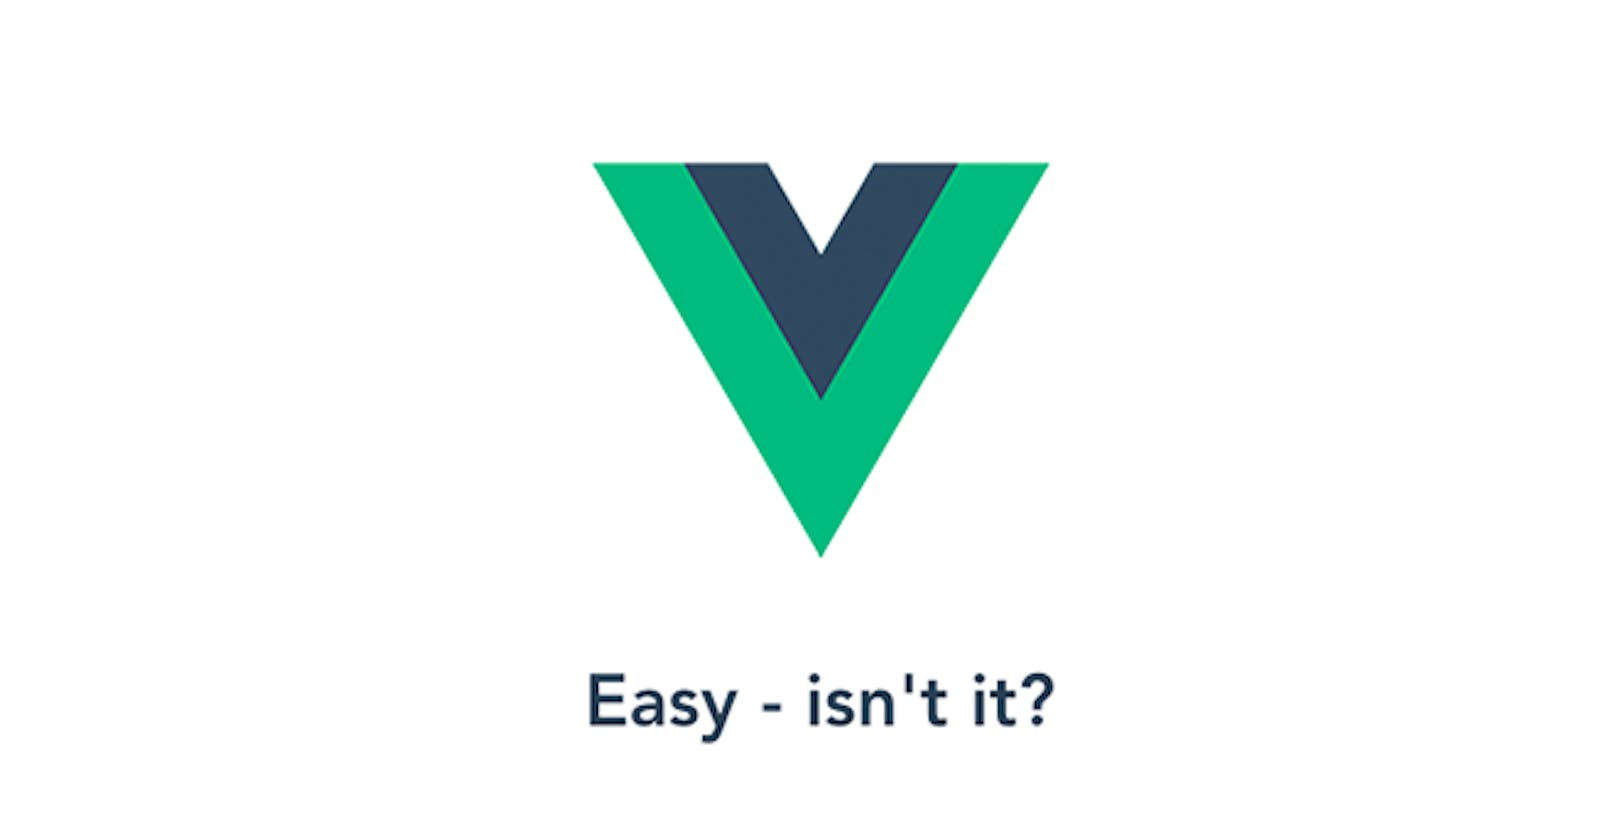 Add a headless CMS to VueJs in 5 minutes - Storyblok